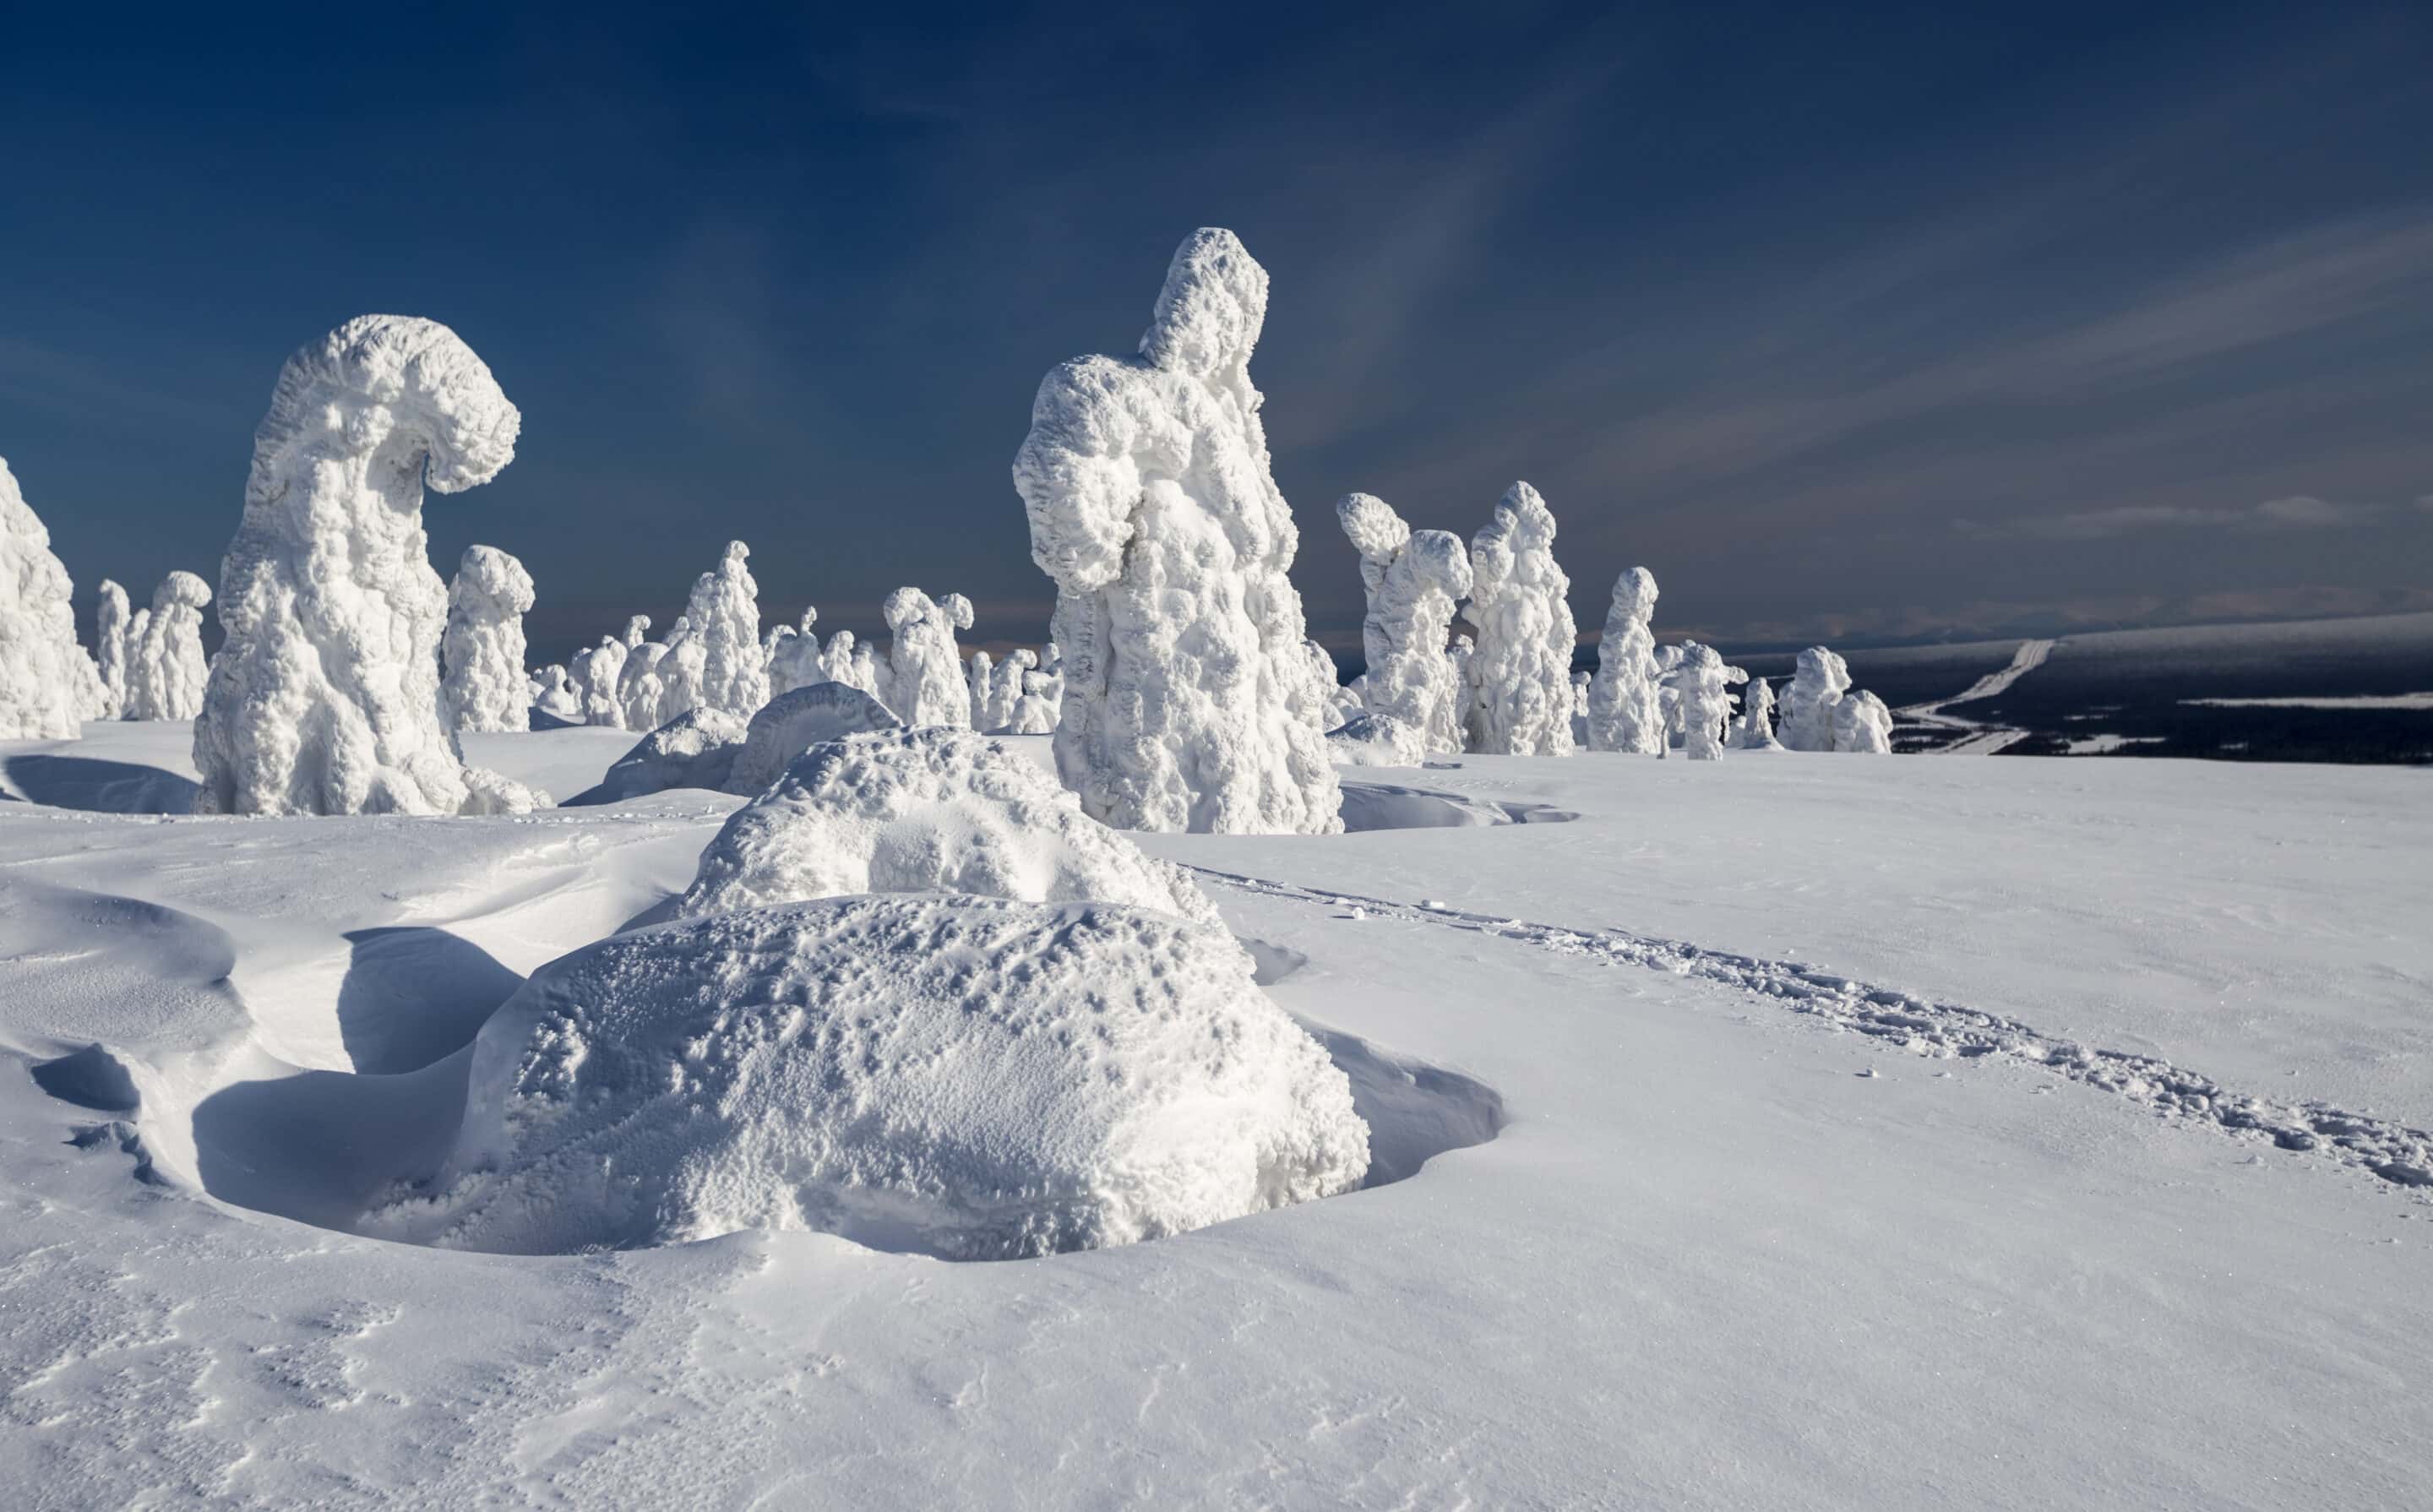 Experience awe-inspiring snow sculptures during Québec City's Winter Carnival. Here you will find life-like sculptures made entirely of snow!